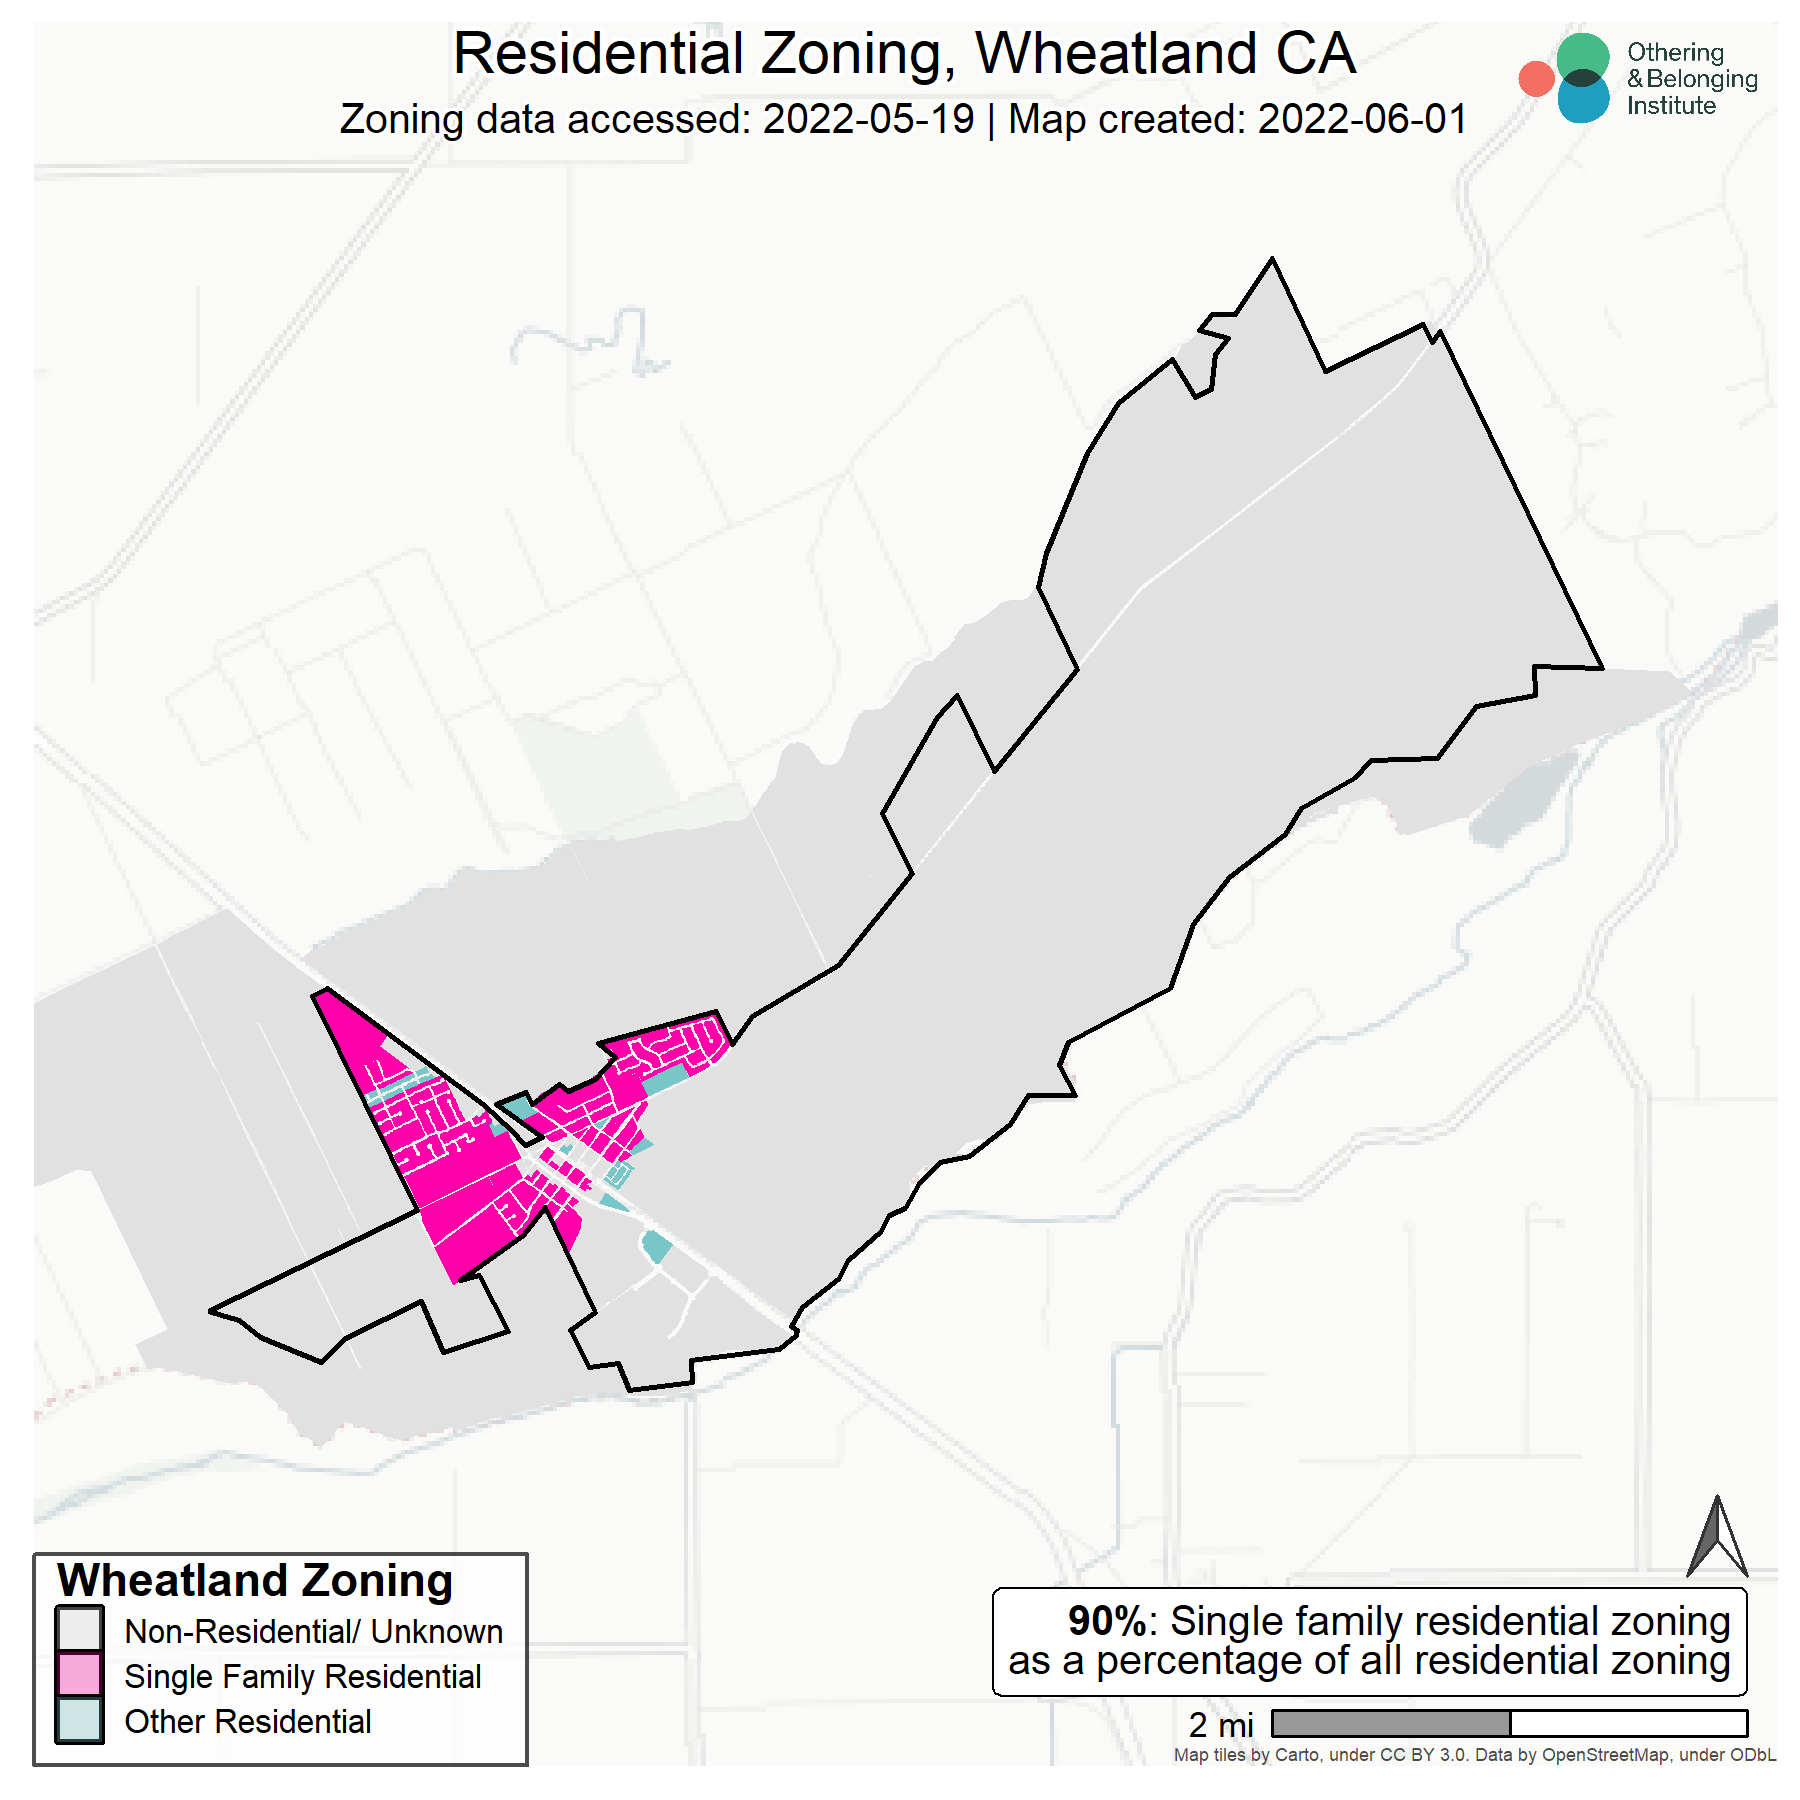 Zoning map of Wheatland